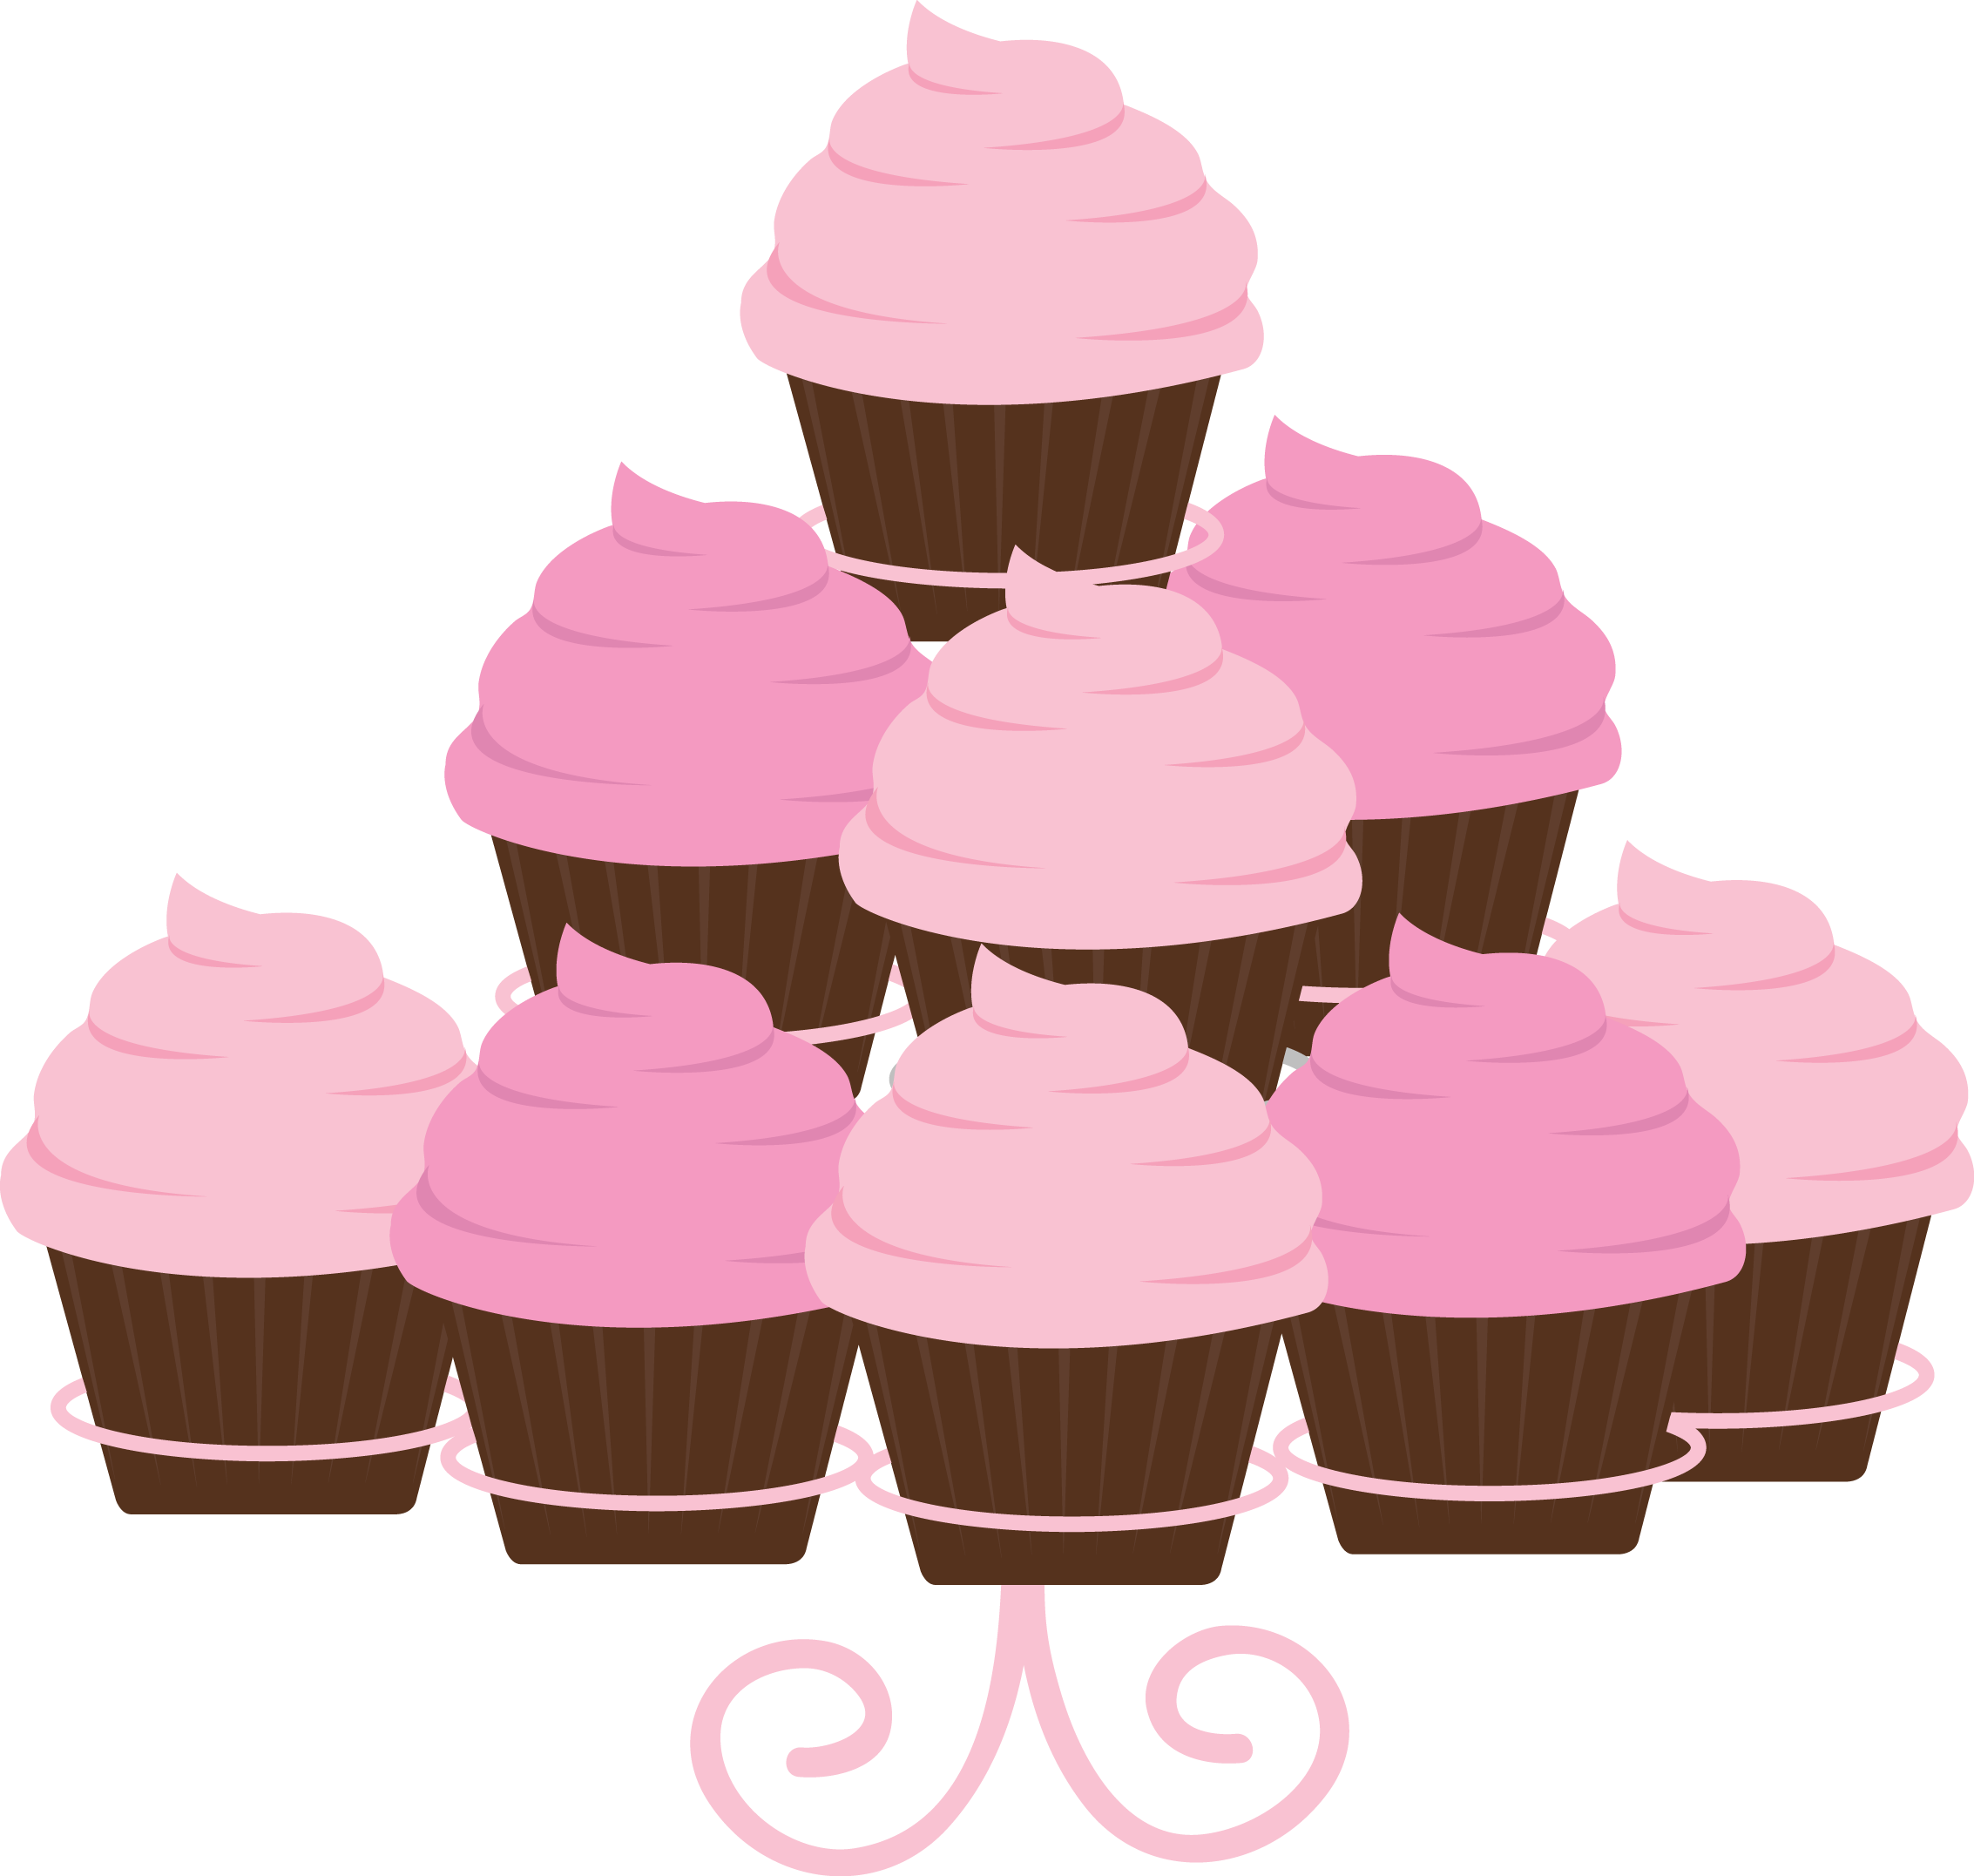 Bakers nd annual cupcakecamp. Cupcakes clipart tray cupcake